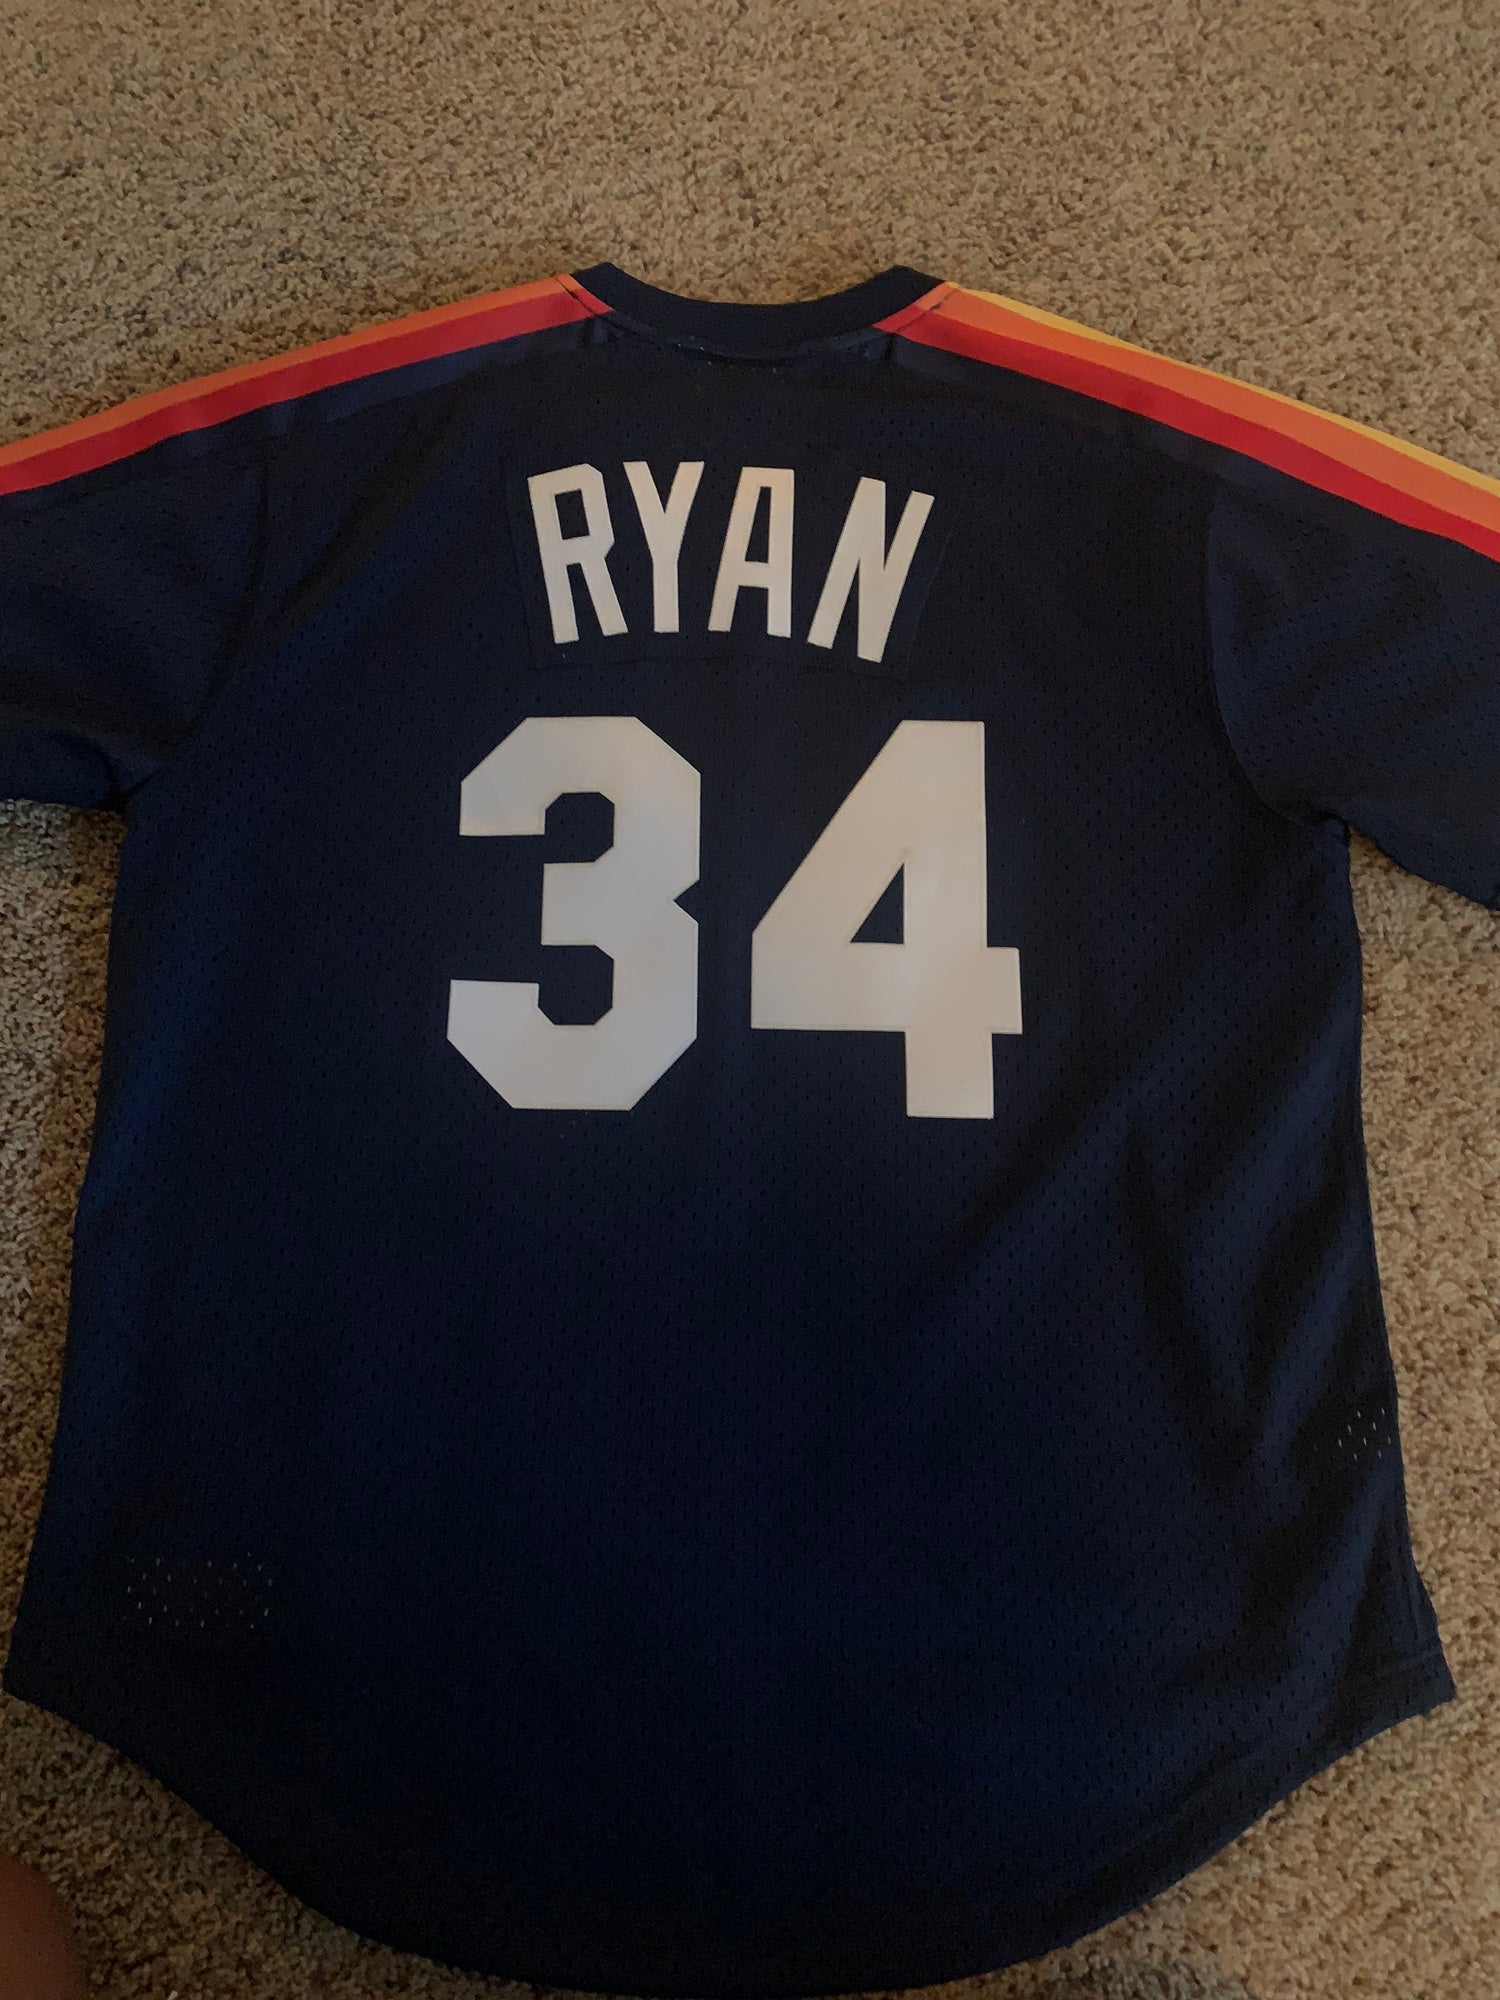 RARE Gold Vintage Astros Jersey - 2XL for Sale in Houston, TX